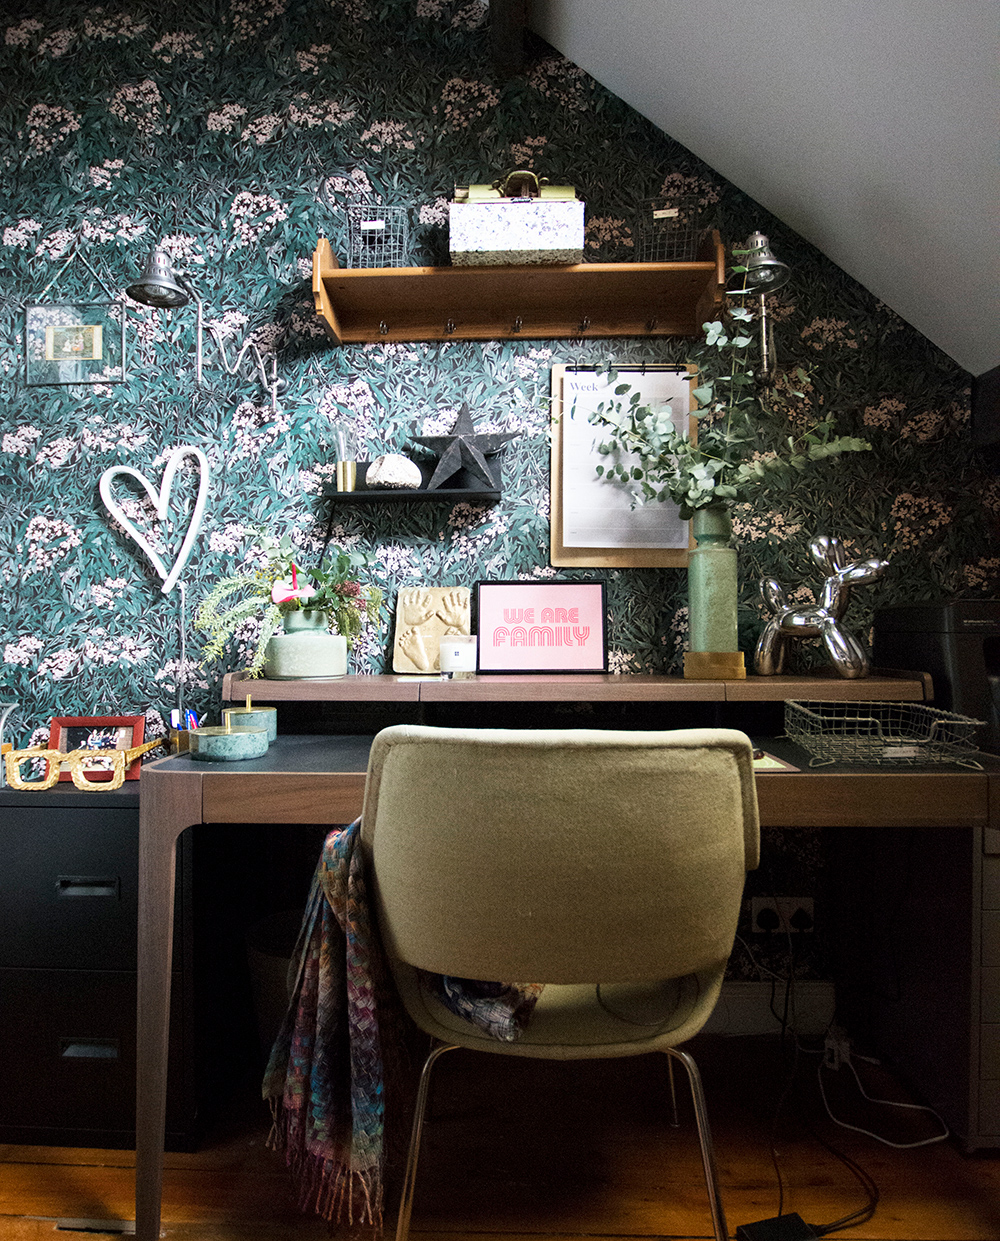 Quirky home office decor with pattered wallpaper